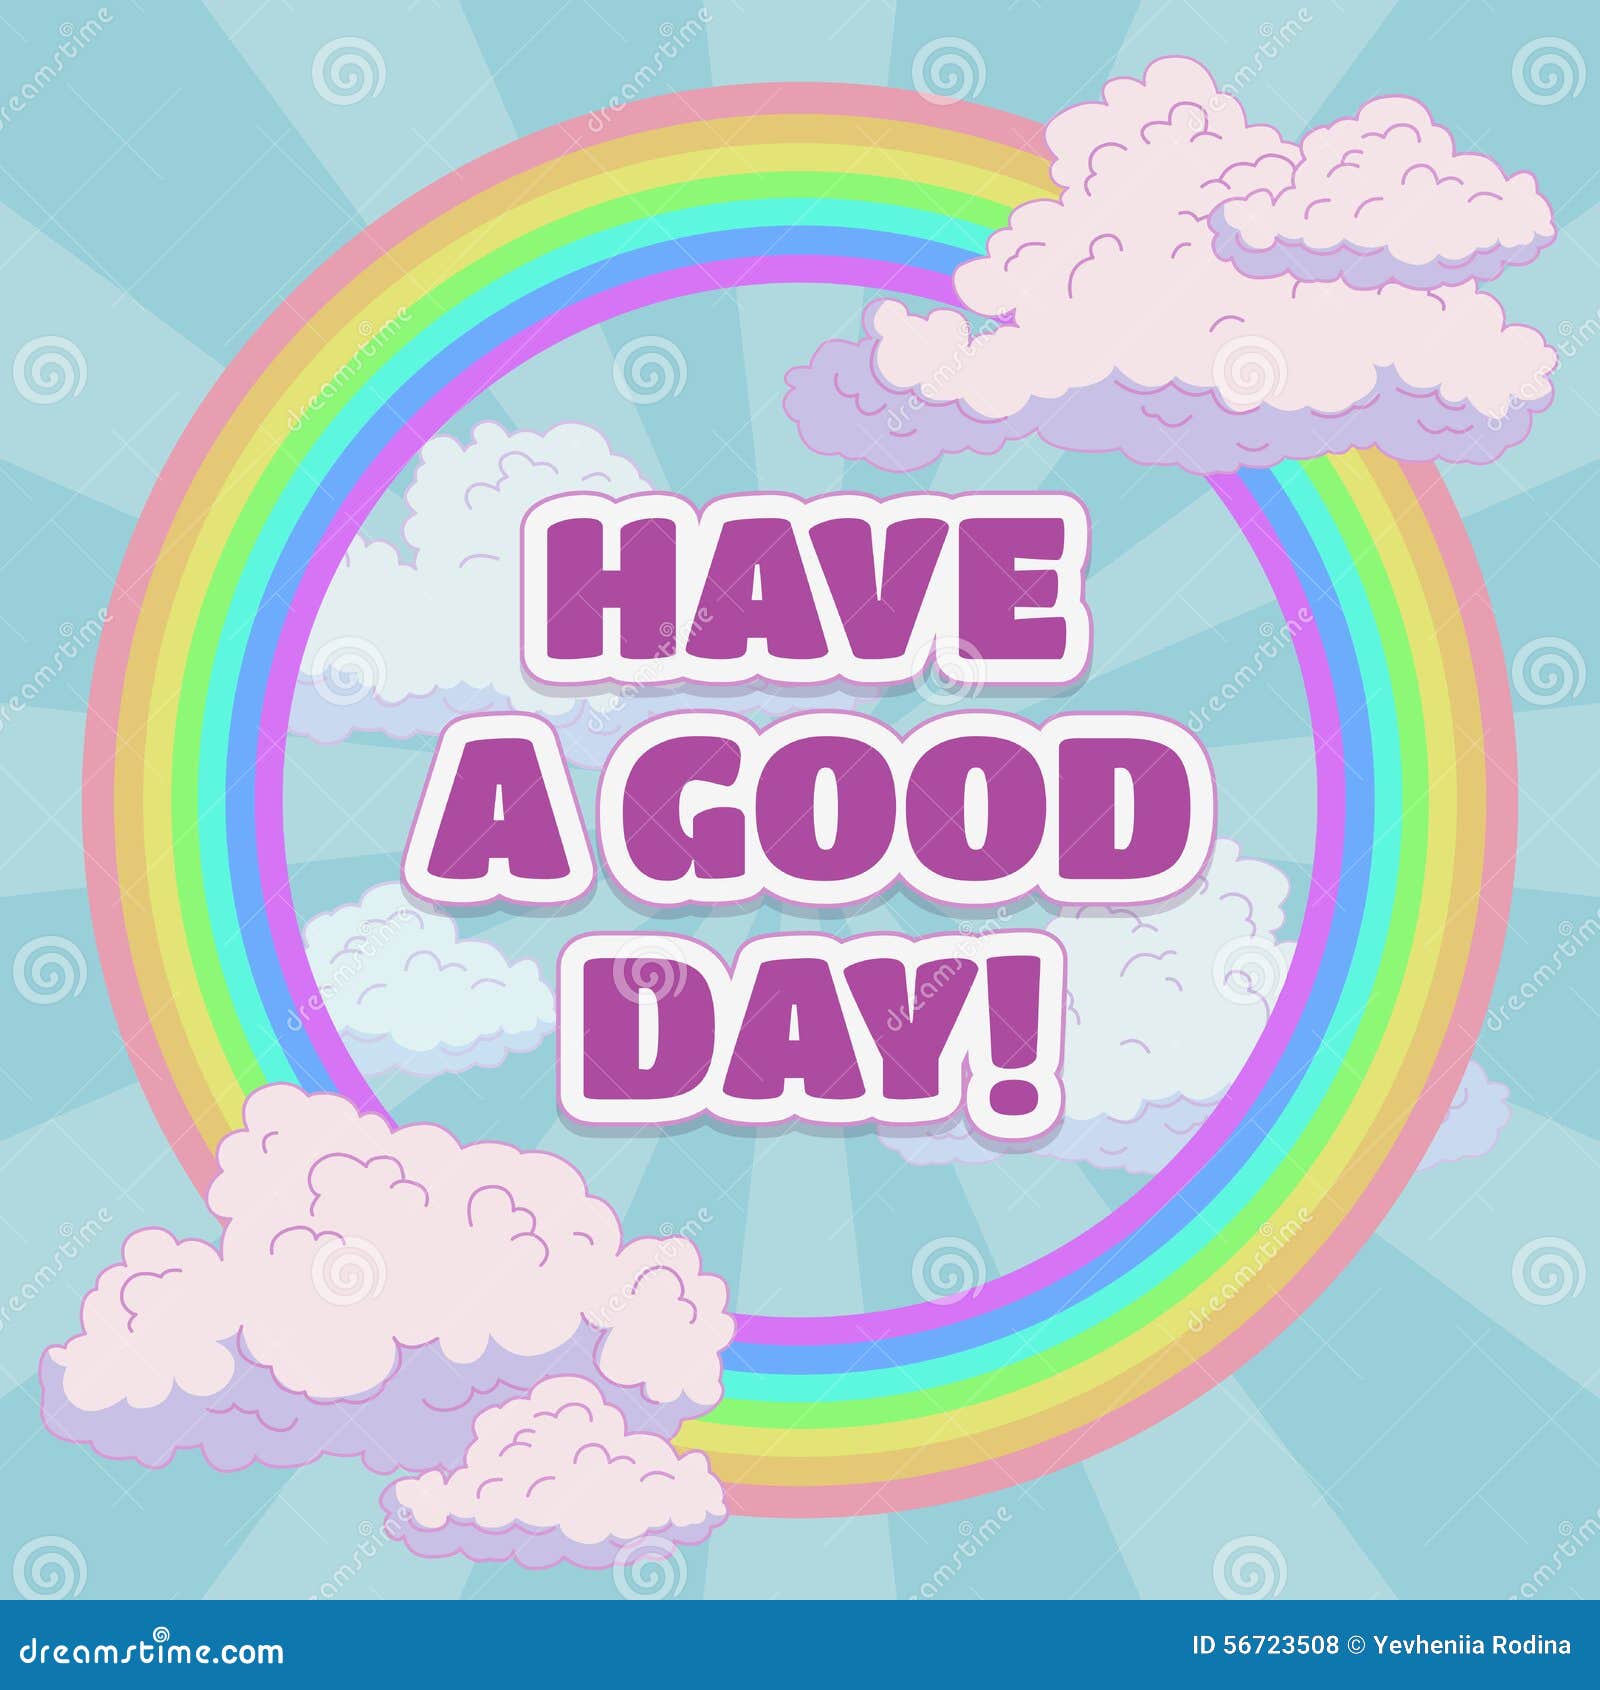 clipart for good day - photo #13